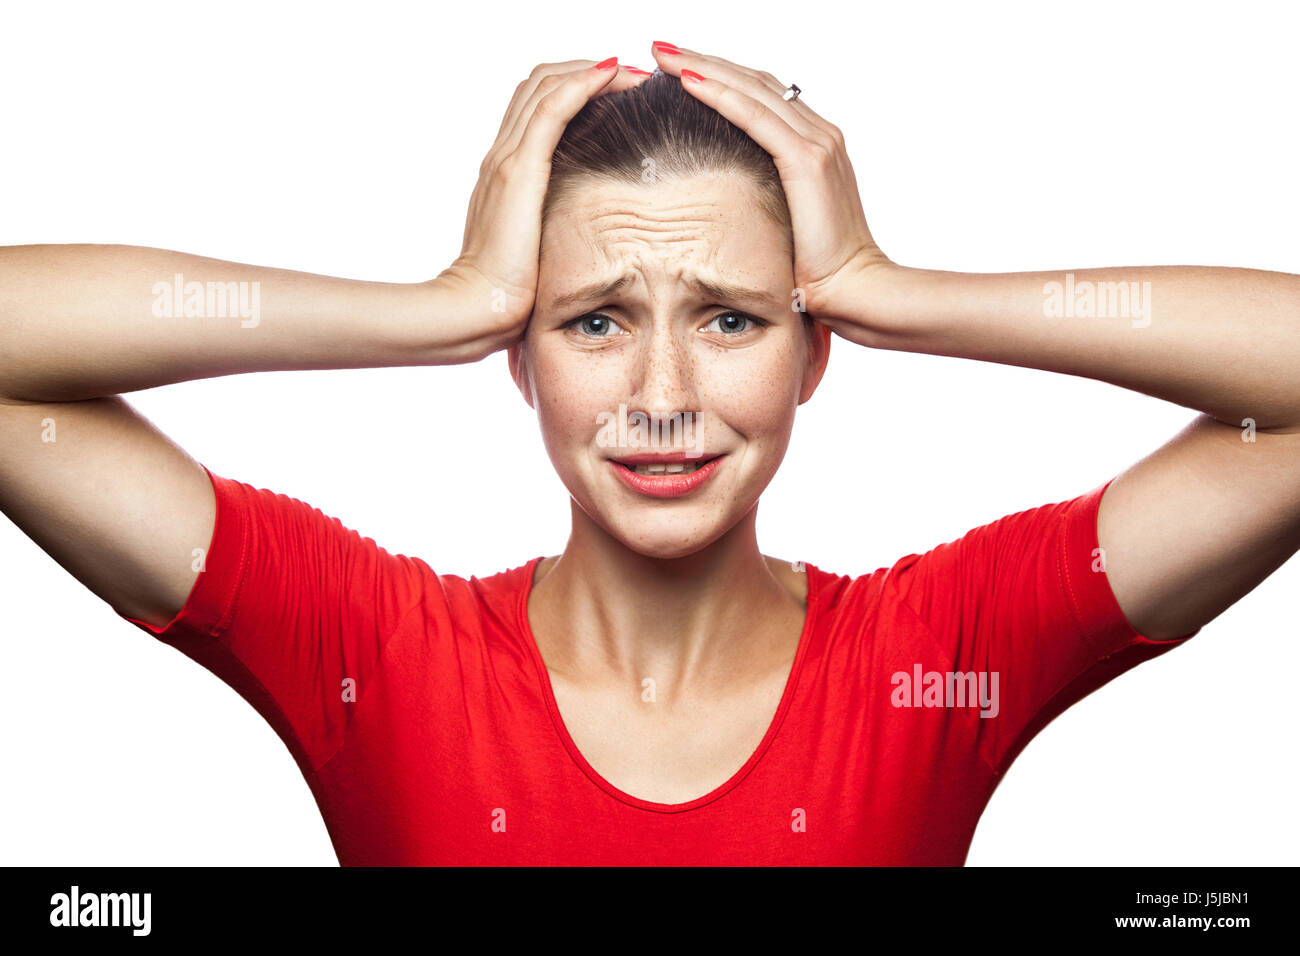 Portrait of sad unhappy woman in red t-shirt with freckles. studio shot. isolated on white background. Stock Photo